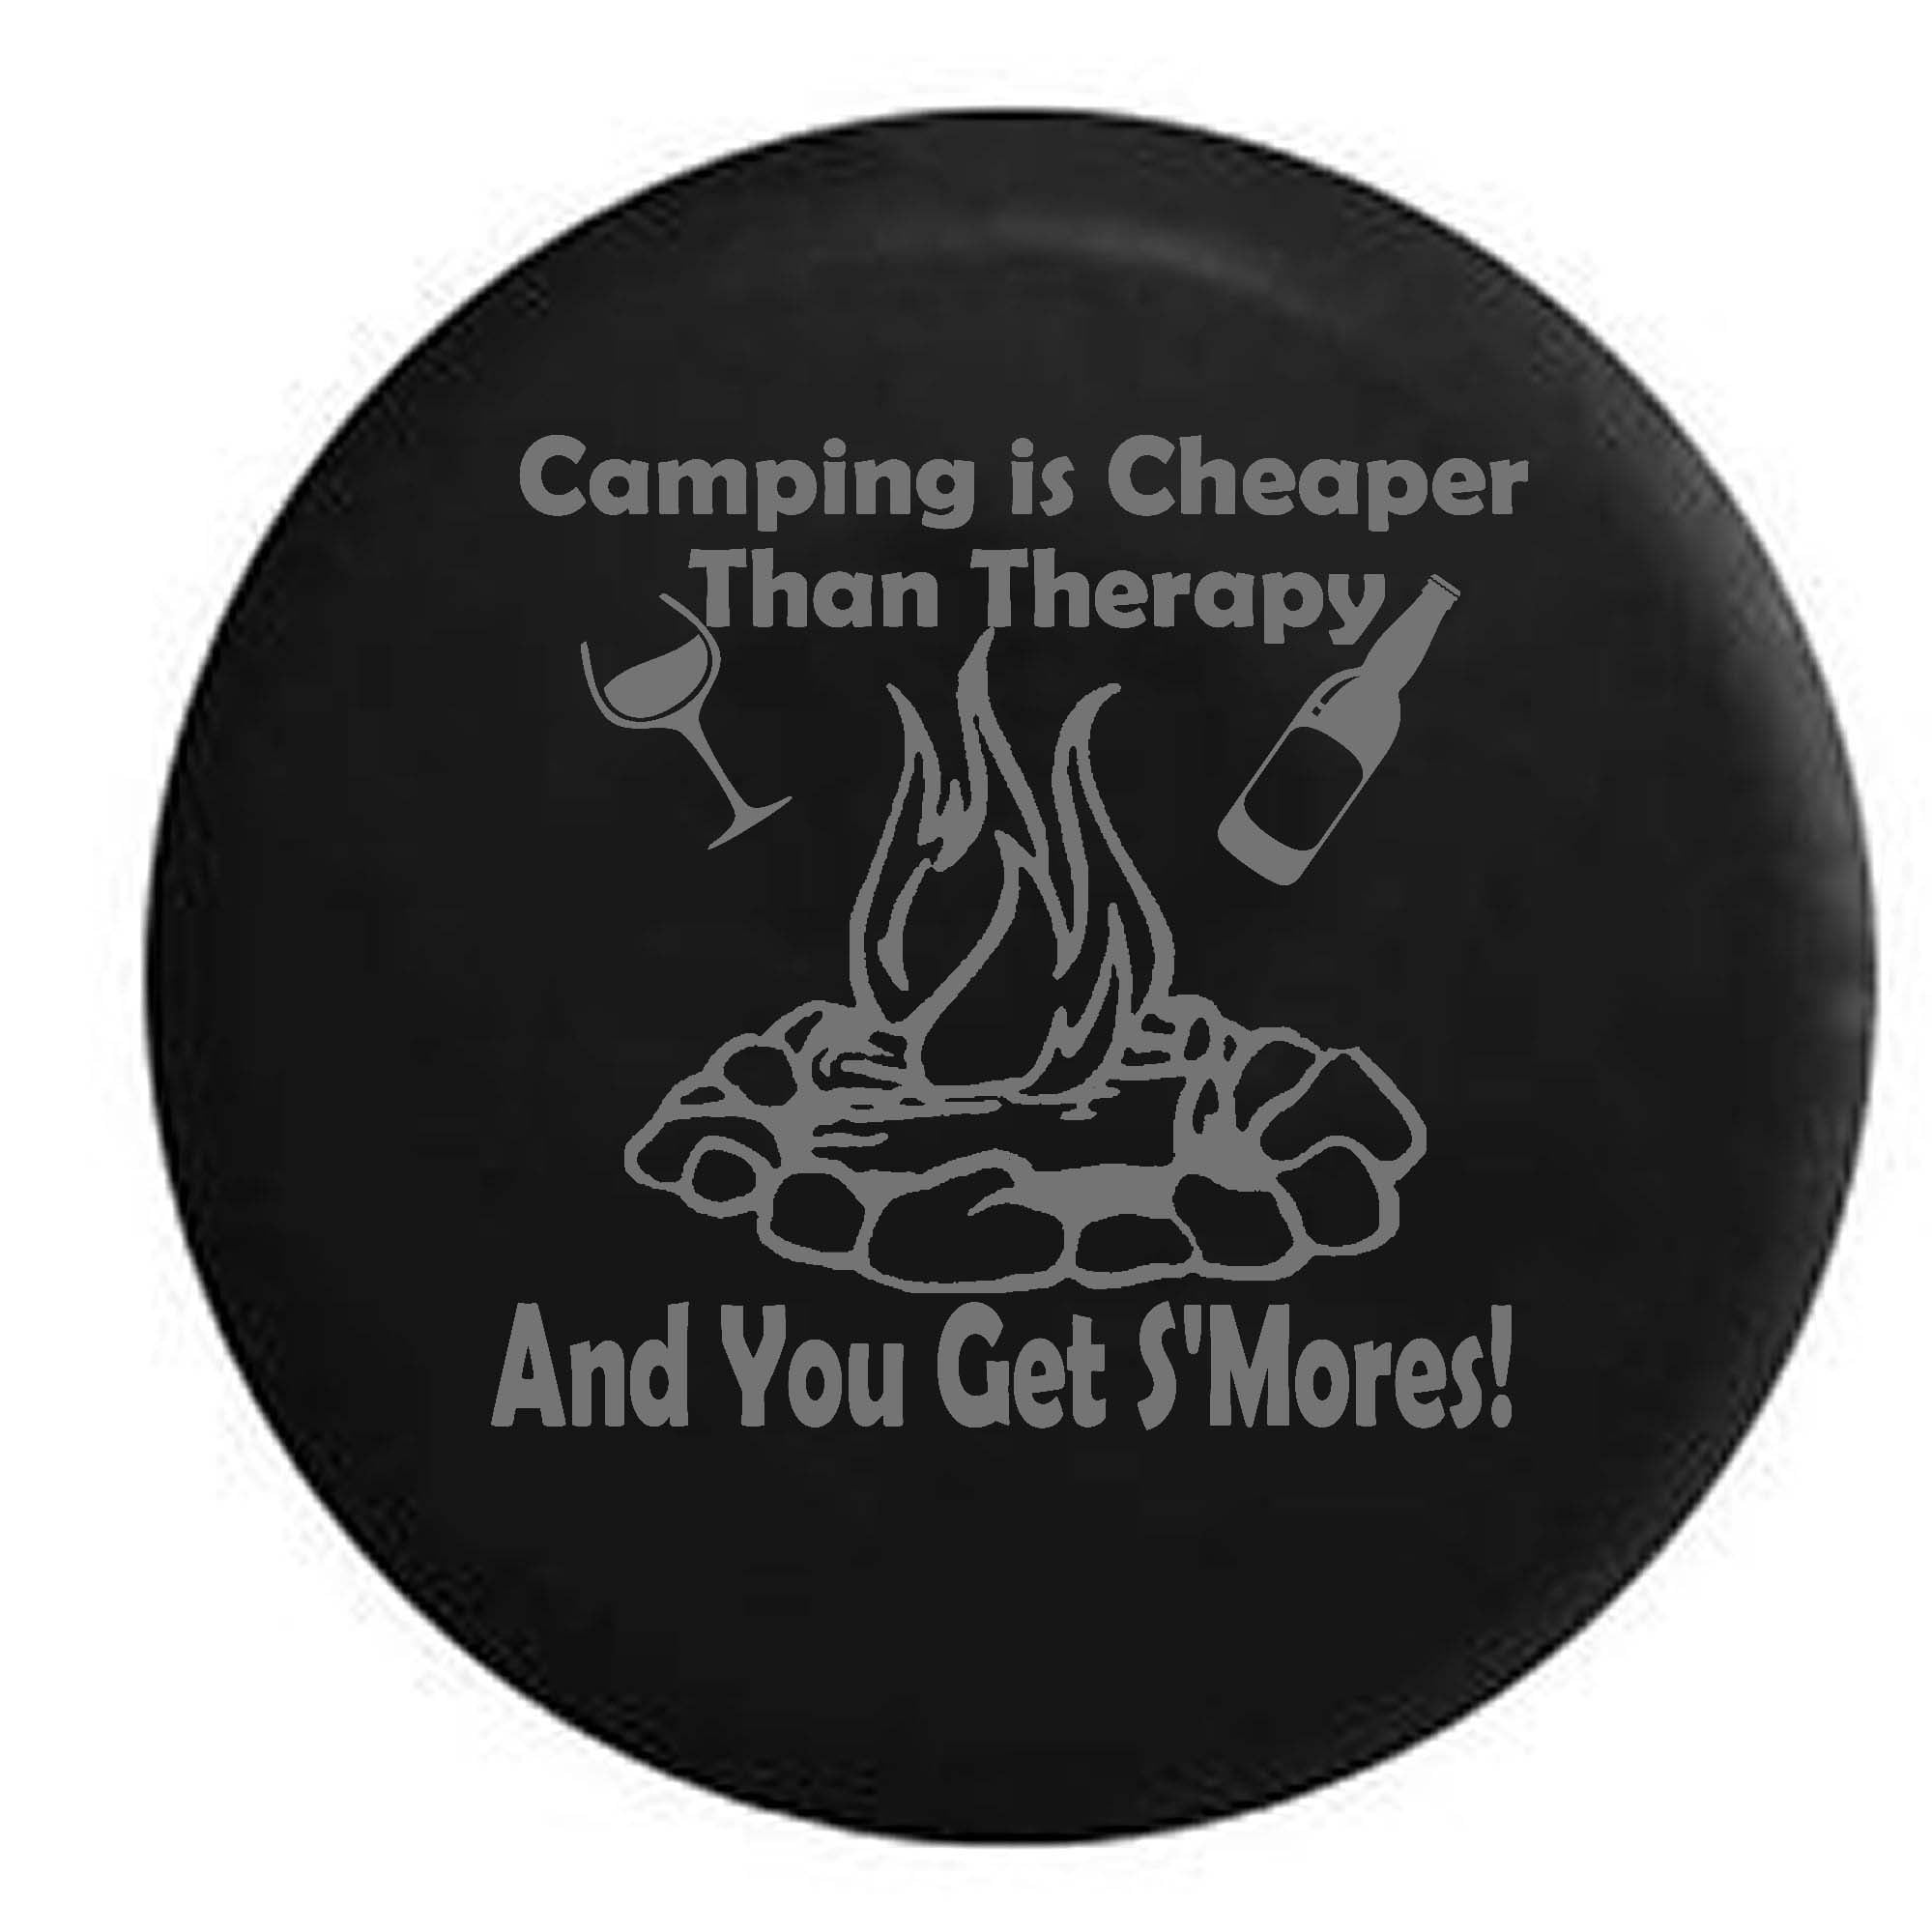 Camping is Cheaper than Therapy & You Get Smores RV Motorhome Travel Spare Tire Cover OEM Vinyl Black 27.5 in 